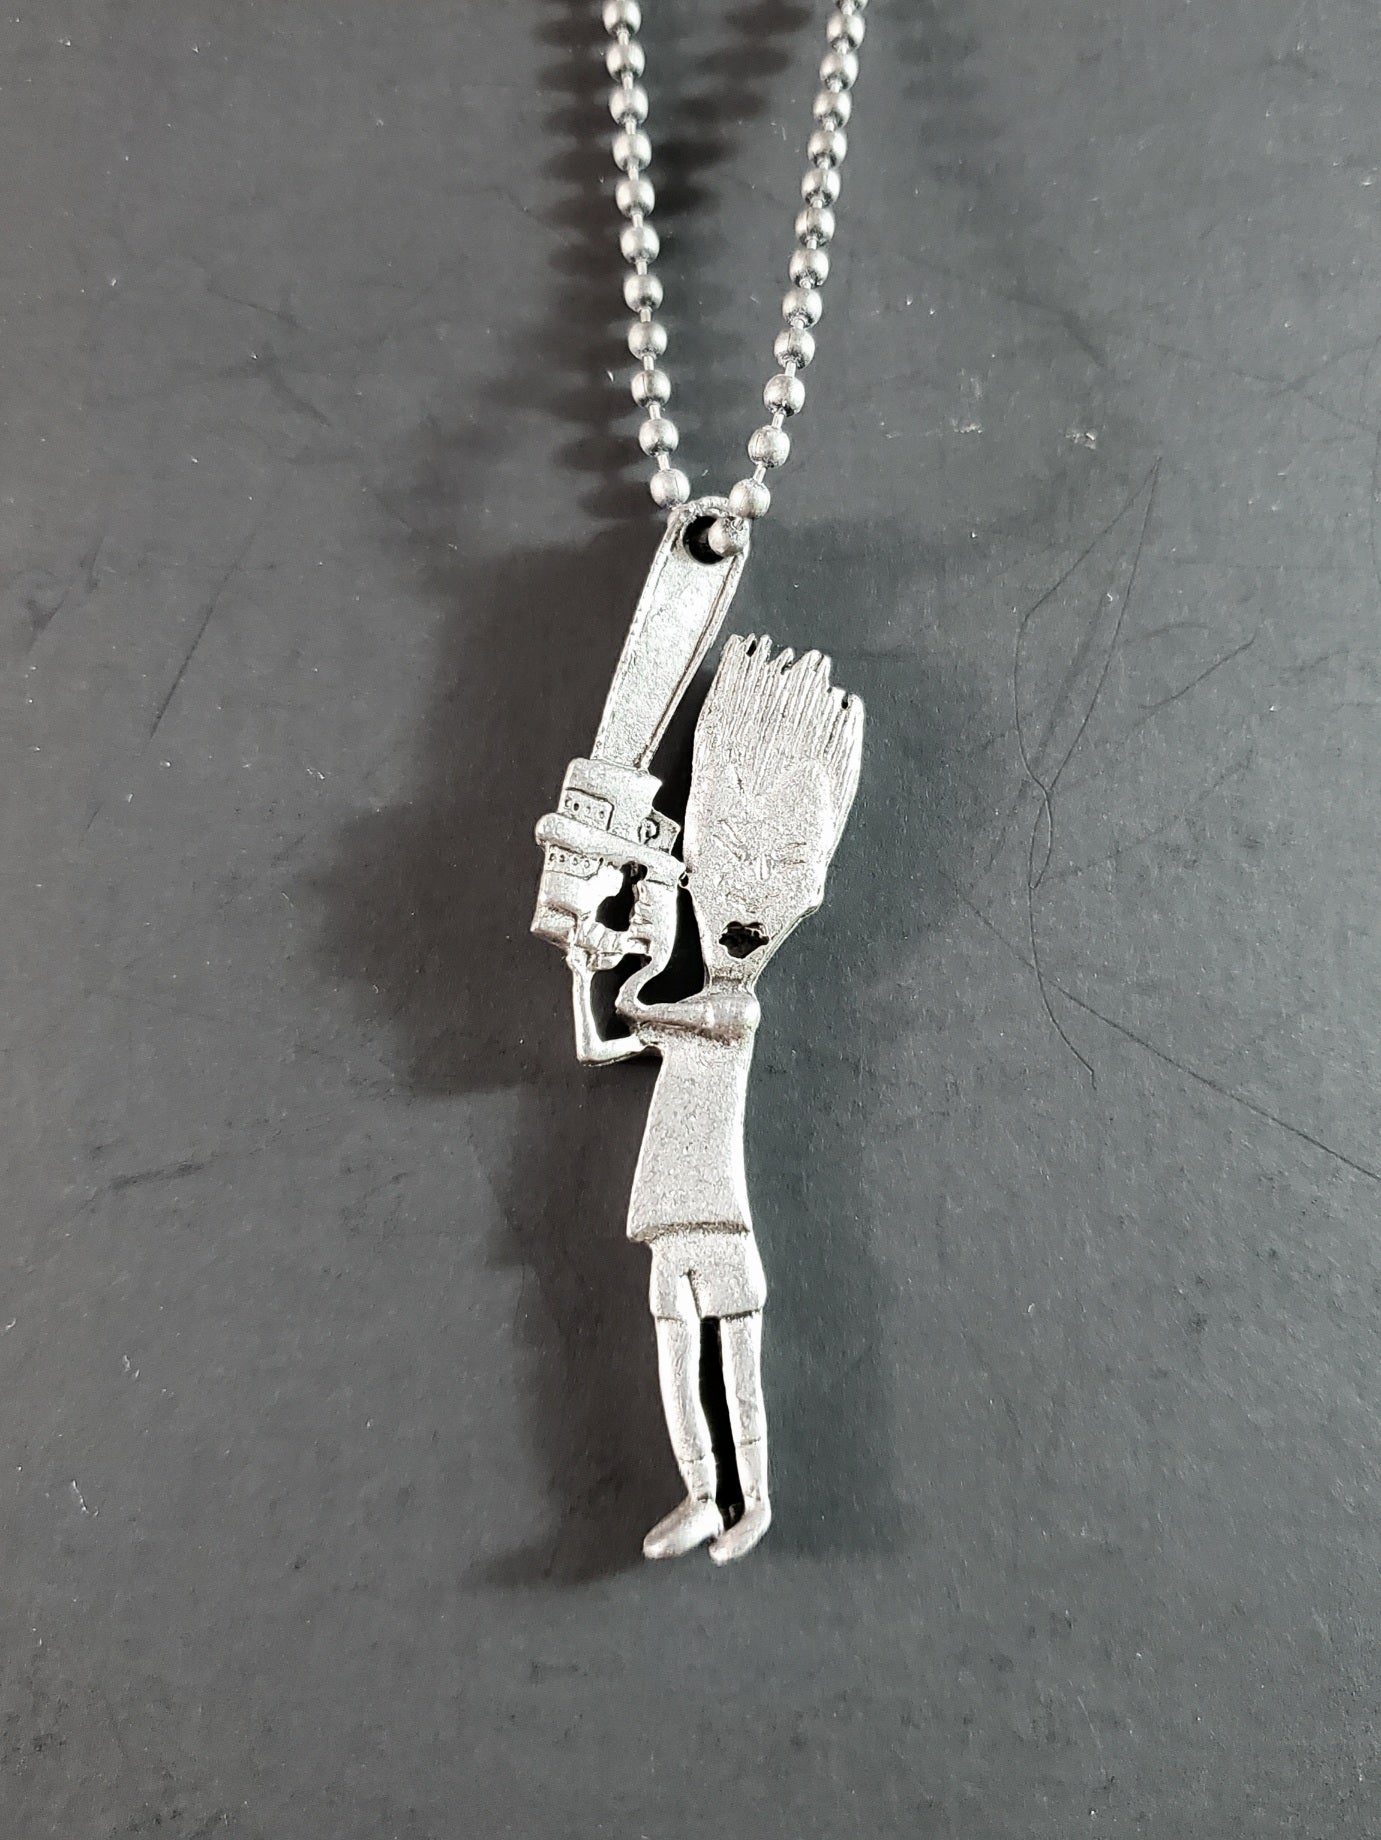 Beavis and Butt-Head deadstock necklace featuring pewter Butt-Head wielding a chainsaw  pendant on 26" ballchain.